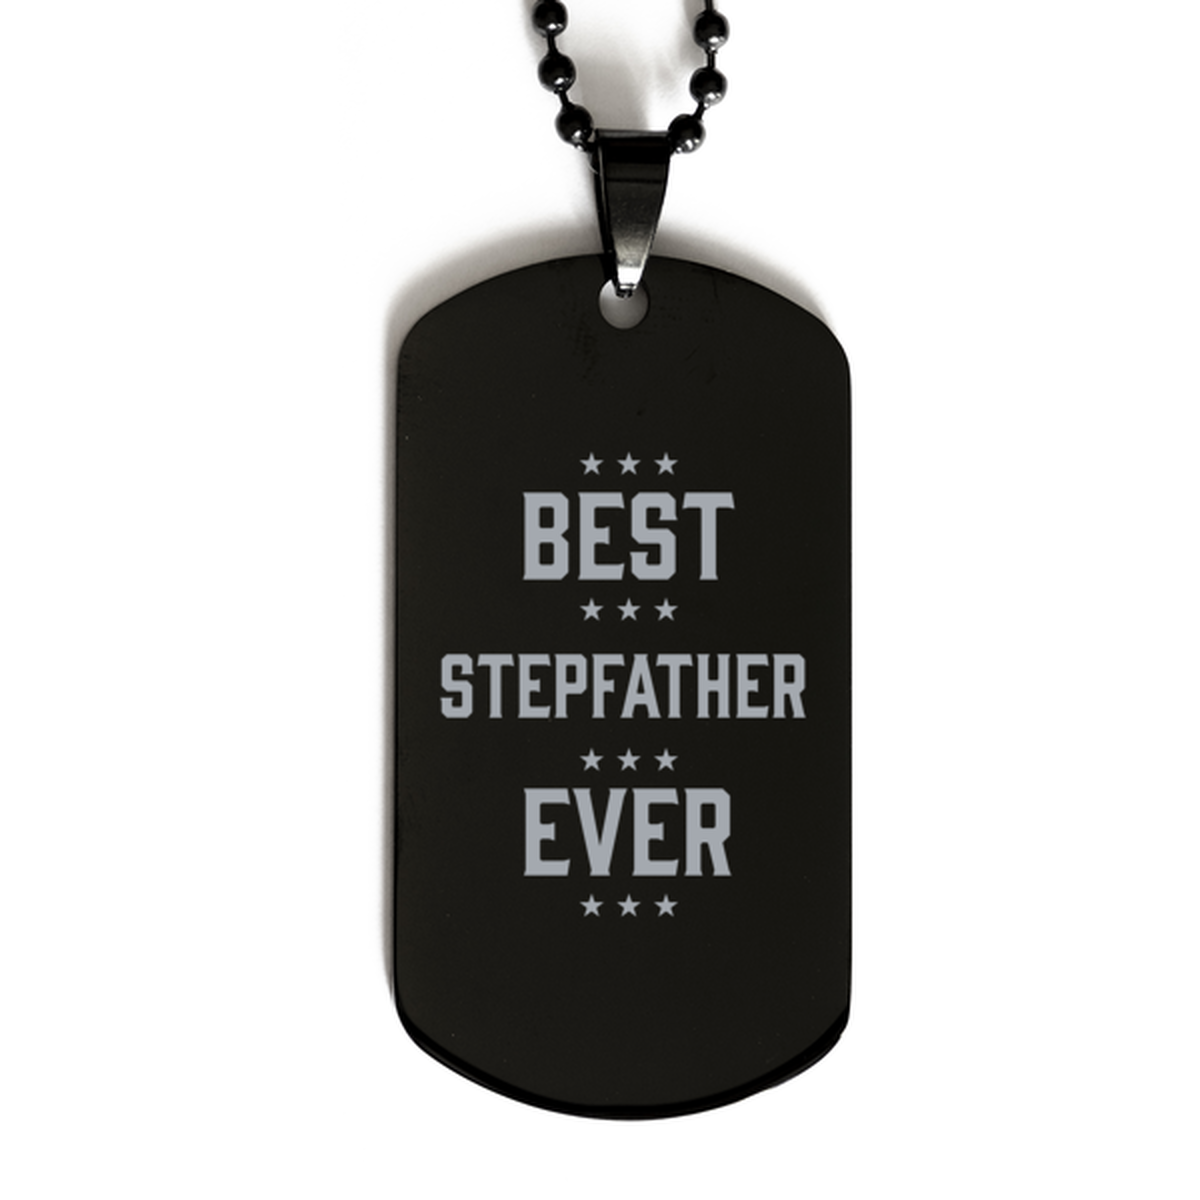 Best Stepfather Ever Stepfather Gifts, Funny Black Dog Tag For Stepfather, Birthday Family Presents Engraved Necklace For Men